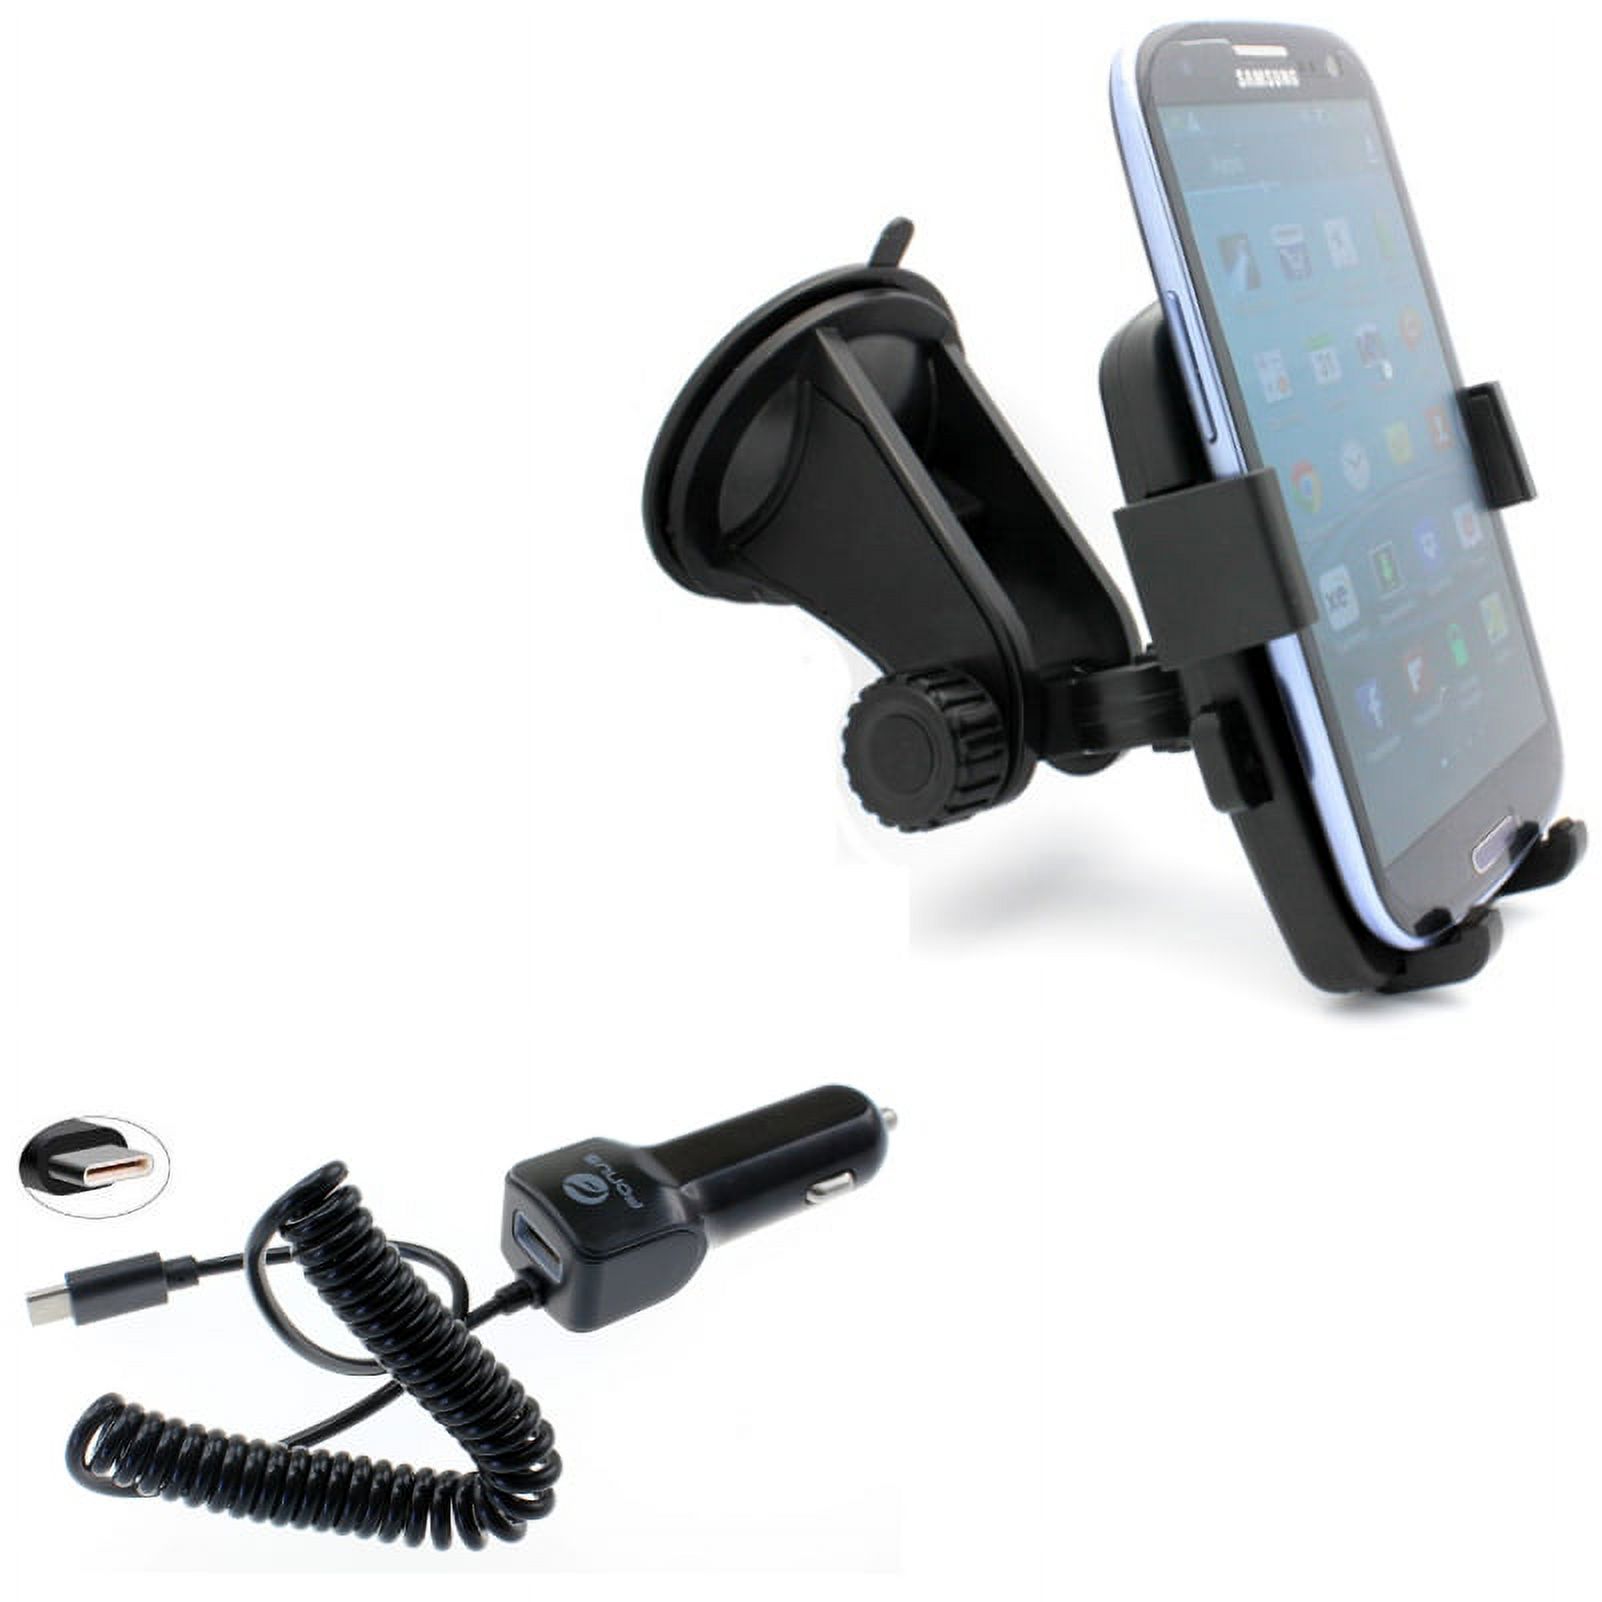 Type-C 3.1A Charger w Holder Windshield Car Mount P2W for Acer Liquid Jade Primo - Alcatel PulseMix, 7, Idol 5S 5 4S - ASUS Zenfone V Live, ROG Phone, AR 6 5z 4 Pro - Blackberry Motion, Key2 - image 1 of 13